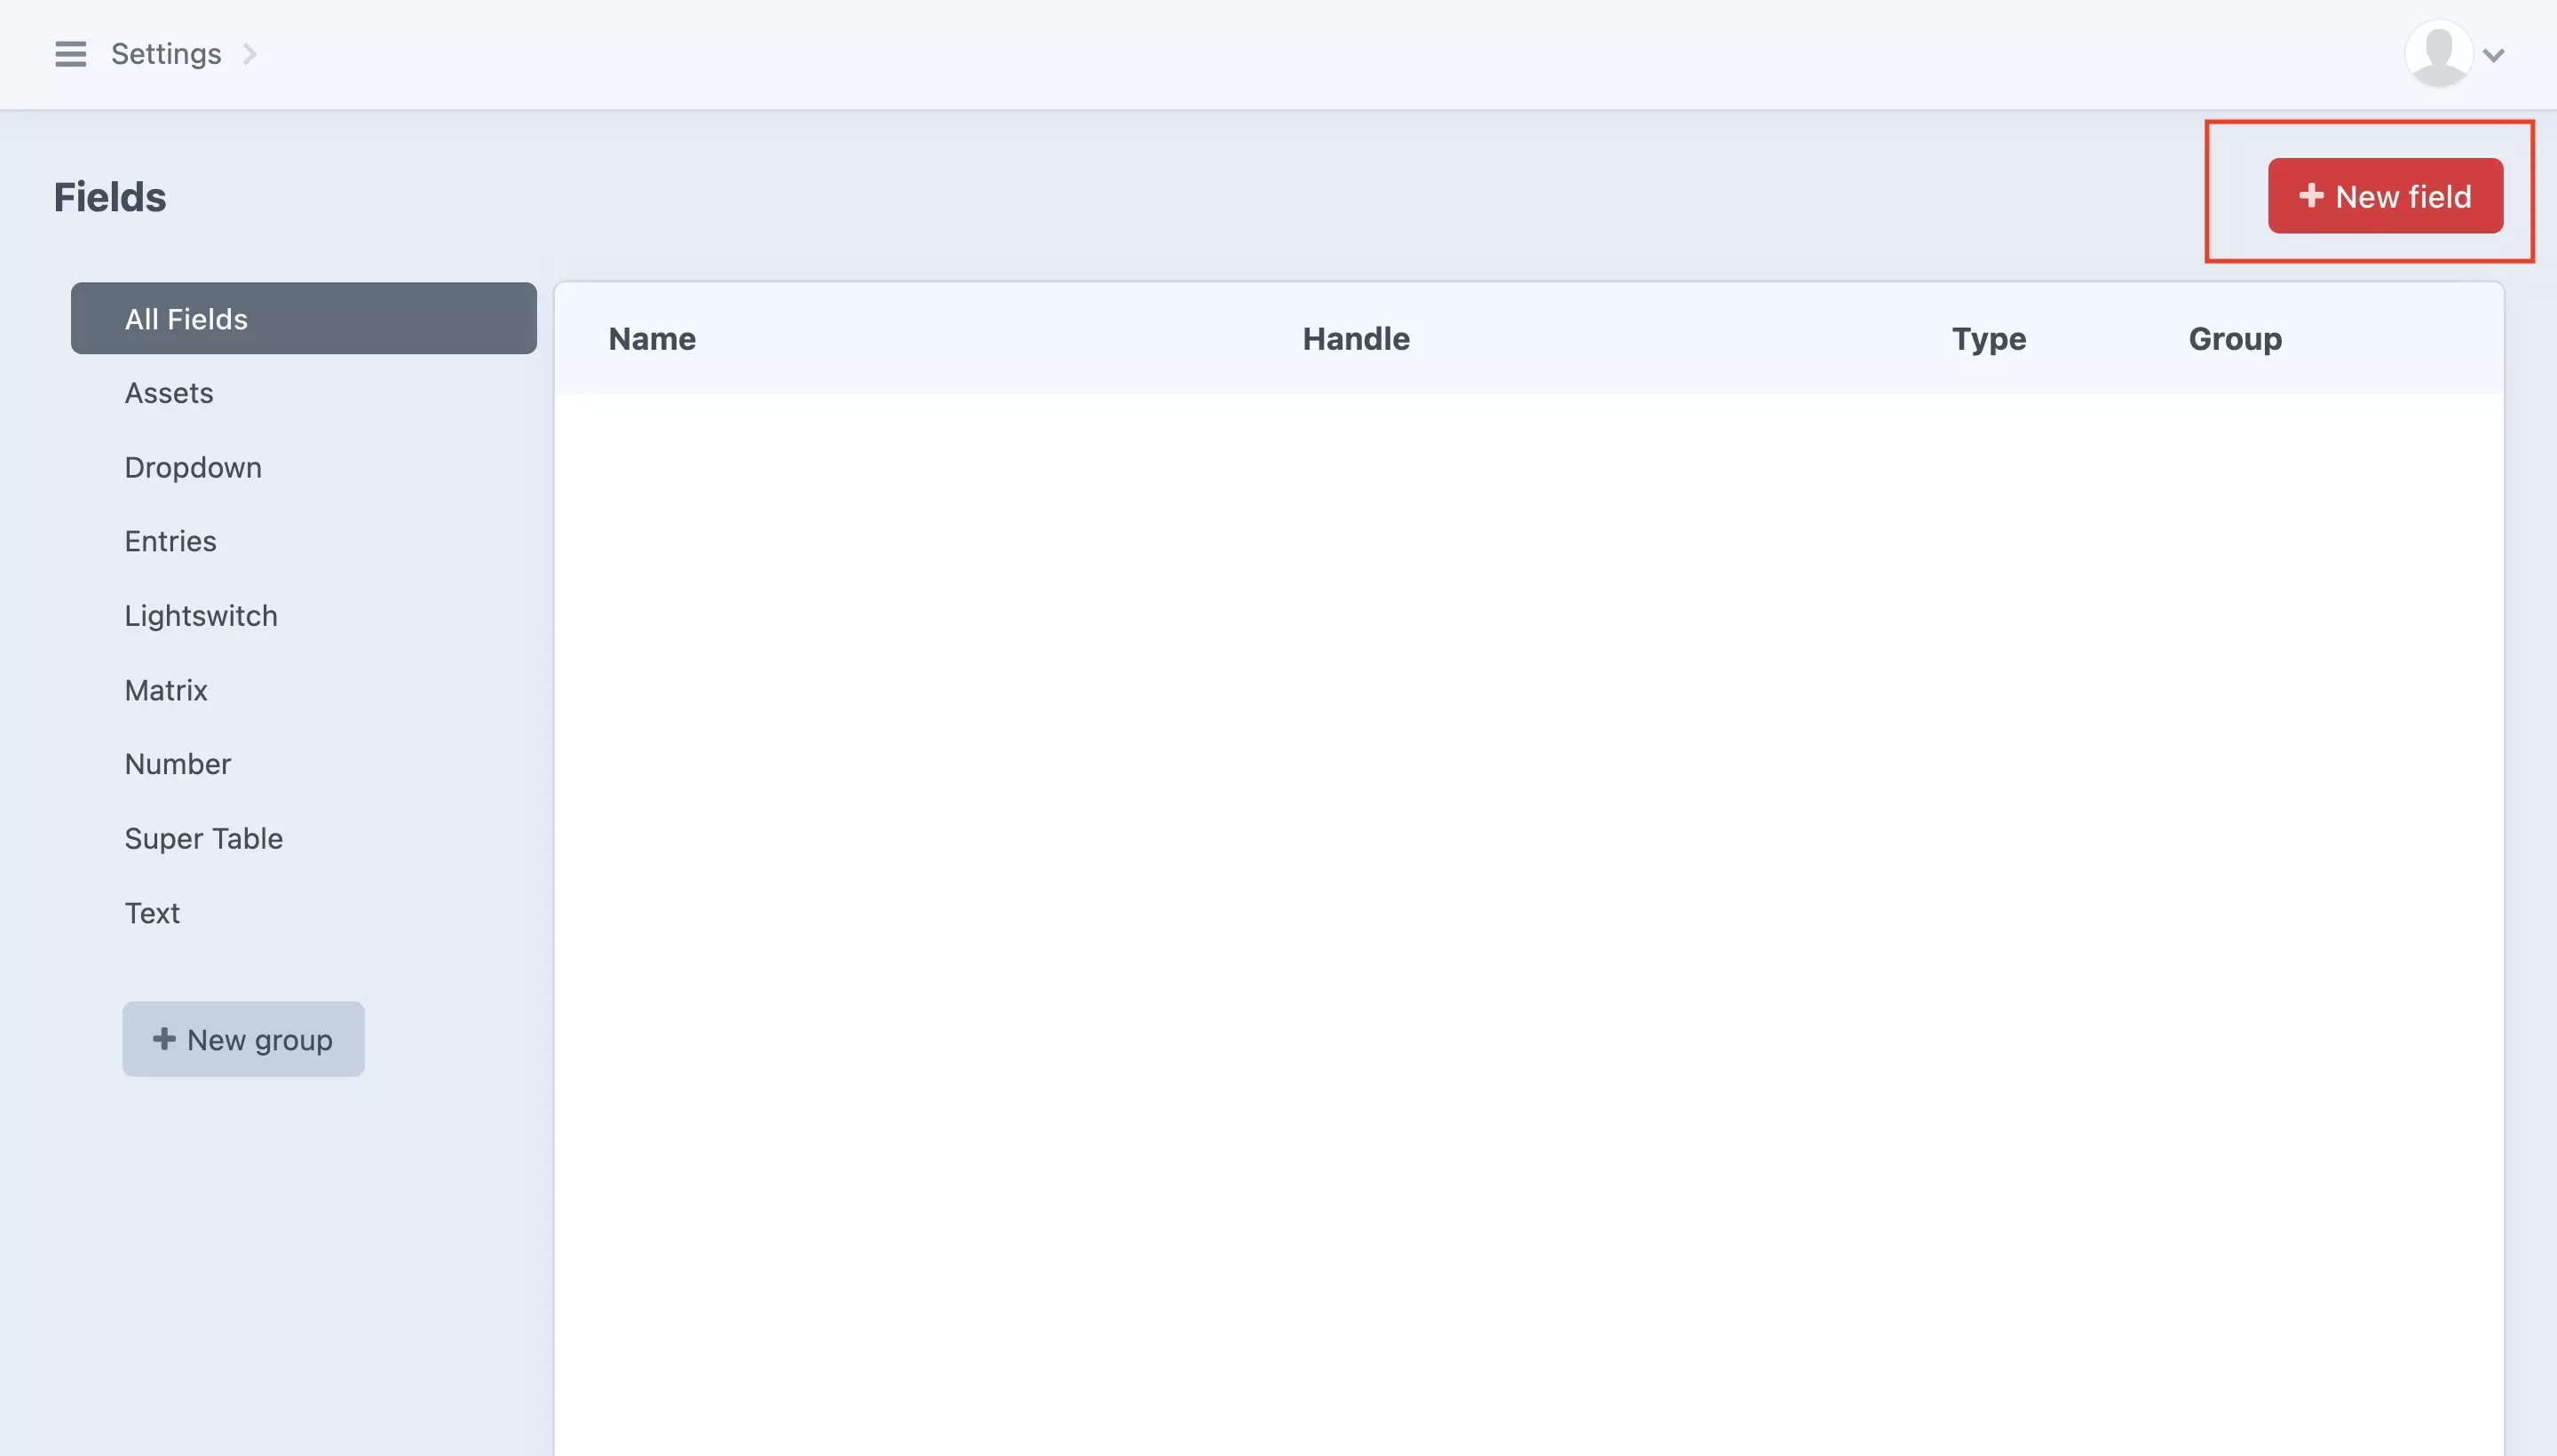 A screenshot of the Fields Craft CMS screen with a highlight on the "+ New field" button on the top right of the screen.